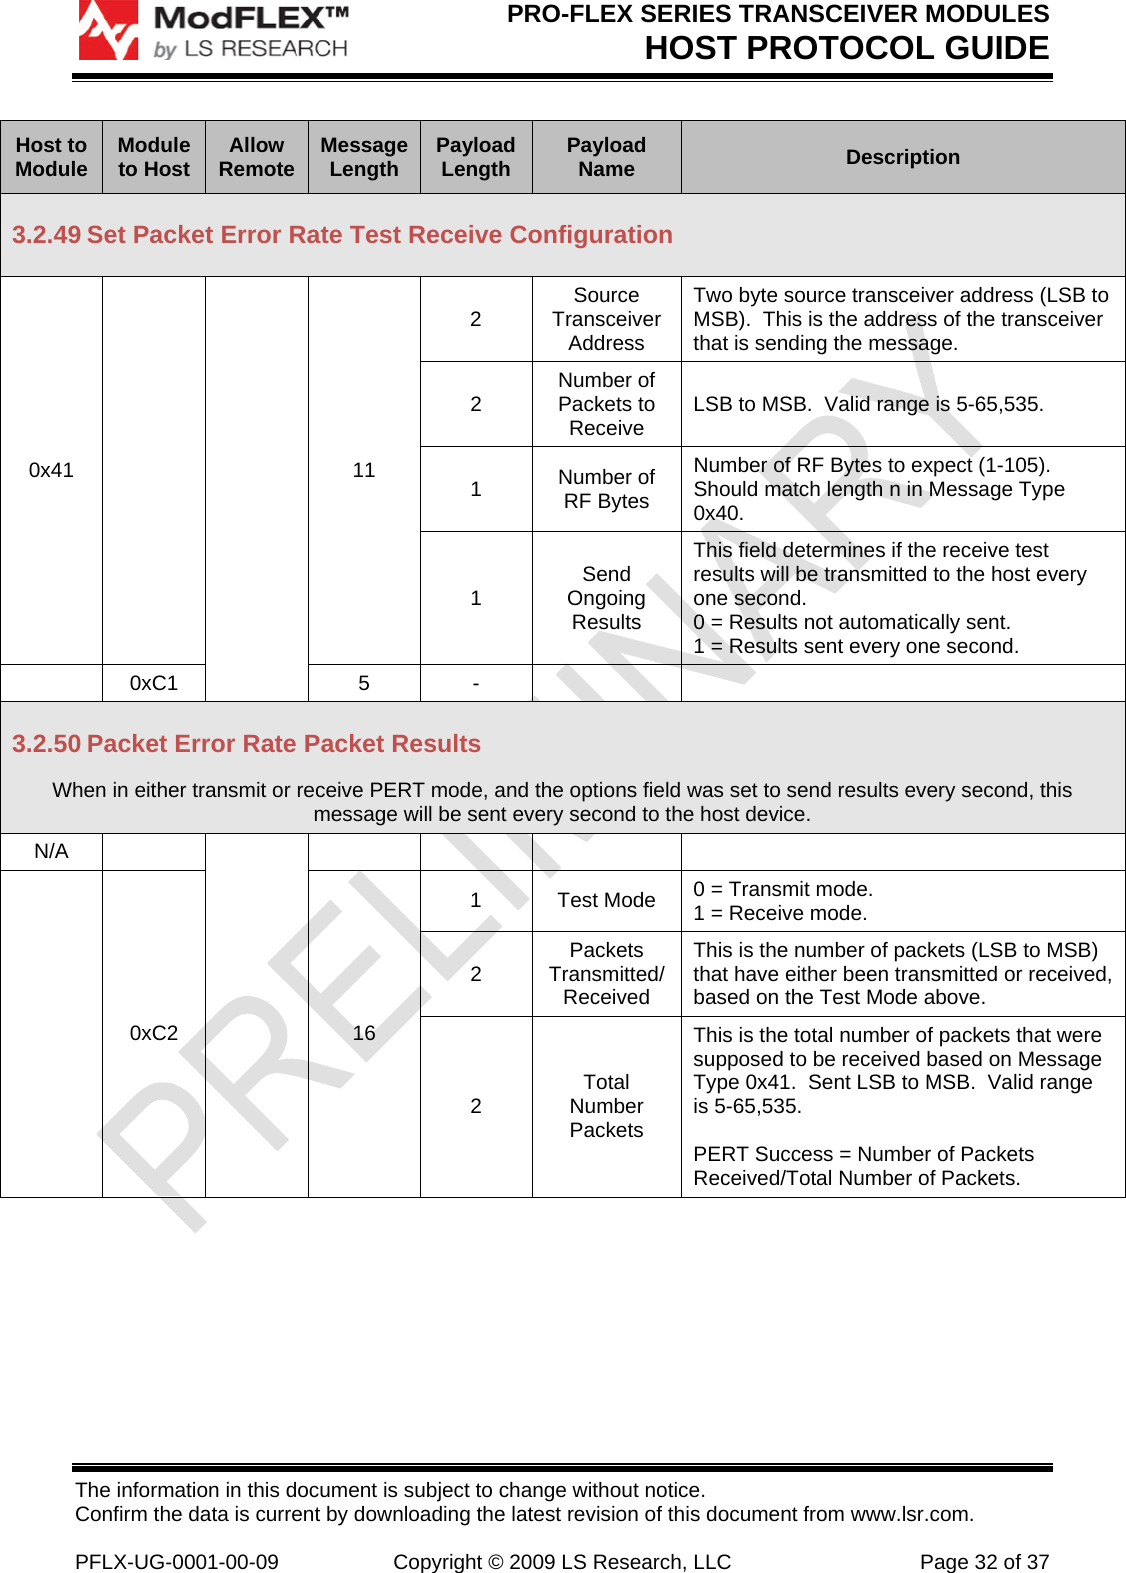 PRO-FLEX SERIES TRANSCEIVER MODULES HOST PROTOCOL GUIDE The information in this document is subject to change without notice. Confirm the data is current by downloading the latest revision of this document from www.lsr.com.  PFLX-UG-0001-00-09  Copyright © 2009 LS Research, LLC  Page 32 of 37 Host to Module  Module to Host  Allow Remote  Message Length  Payload Length  Payload Name  Description 3.2.49 Set Packet Error Rate Test Receive Configuration 0x41    11 2  Source Transceiver Address Two byte source transceiver address (LSB to MSB).  This is the address of the transceiver that is sending the message. 2  Number of Packets to Receive  LSB to MSB.  Valid range is 5-65,535.  1  Number of RF Bytes Number of RF Bytes to expect (1-105).  Should match length n in Message Type 0x40. 1  Send Ongoing Results This field determines if the receive test results will be transmitted to the host every one second. 0 = Results not automatically sent. 1 = Results sent every one second.  0xC1  5  -     3.2.50 Packet Error Rate Packet Results When in either transmit or receive PERT mode, and the options field was set to send results every second, this message will be sent every second to the host device. N/A         0xC2  16 1 Test Mode 0 = Transmit mode. 1 = Receive mode. 2  Packets Transmitted/ Received This is the number of packets (LSB to MSB) that have either been transmitted or received, based on the Test Mode above. 2  Total Number Packets This is the total number of packets that were supposed to be received based on Message Type 0x41.  Sent LSB to MSB.  Valid range is 5-65,535.  PERT Success = Number of Packets Received/Total Number of Packets. 